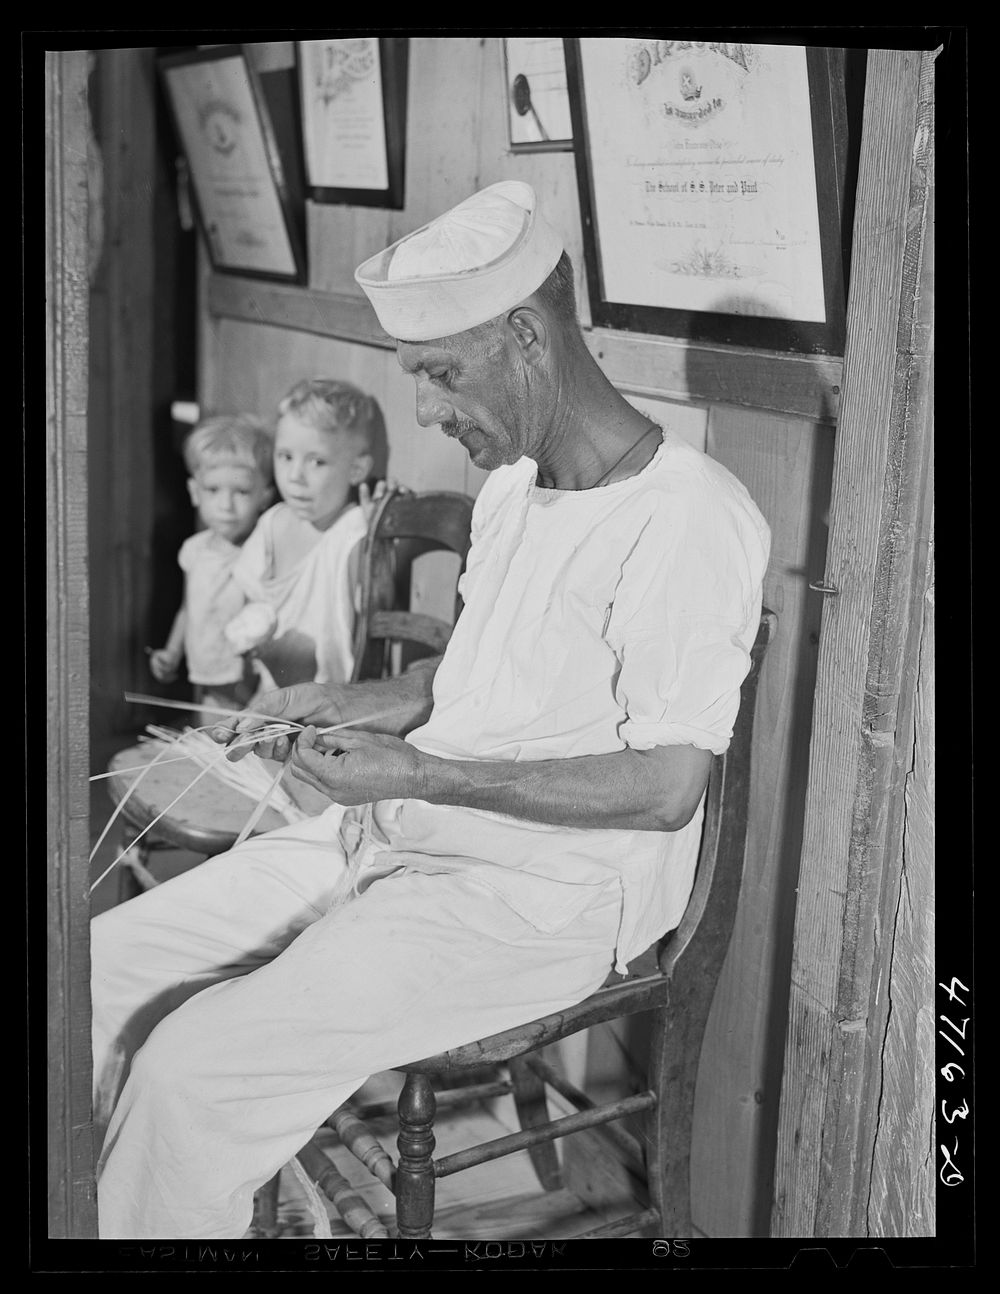 French village, a small settlement on Saint Thomas Island, Virgin Islands. A seaman who makes extra money weaving straw…